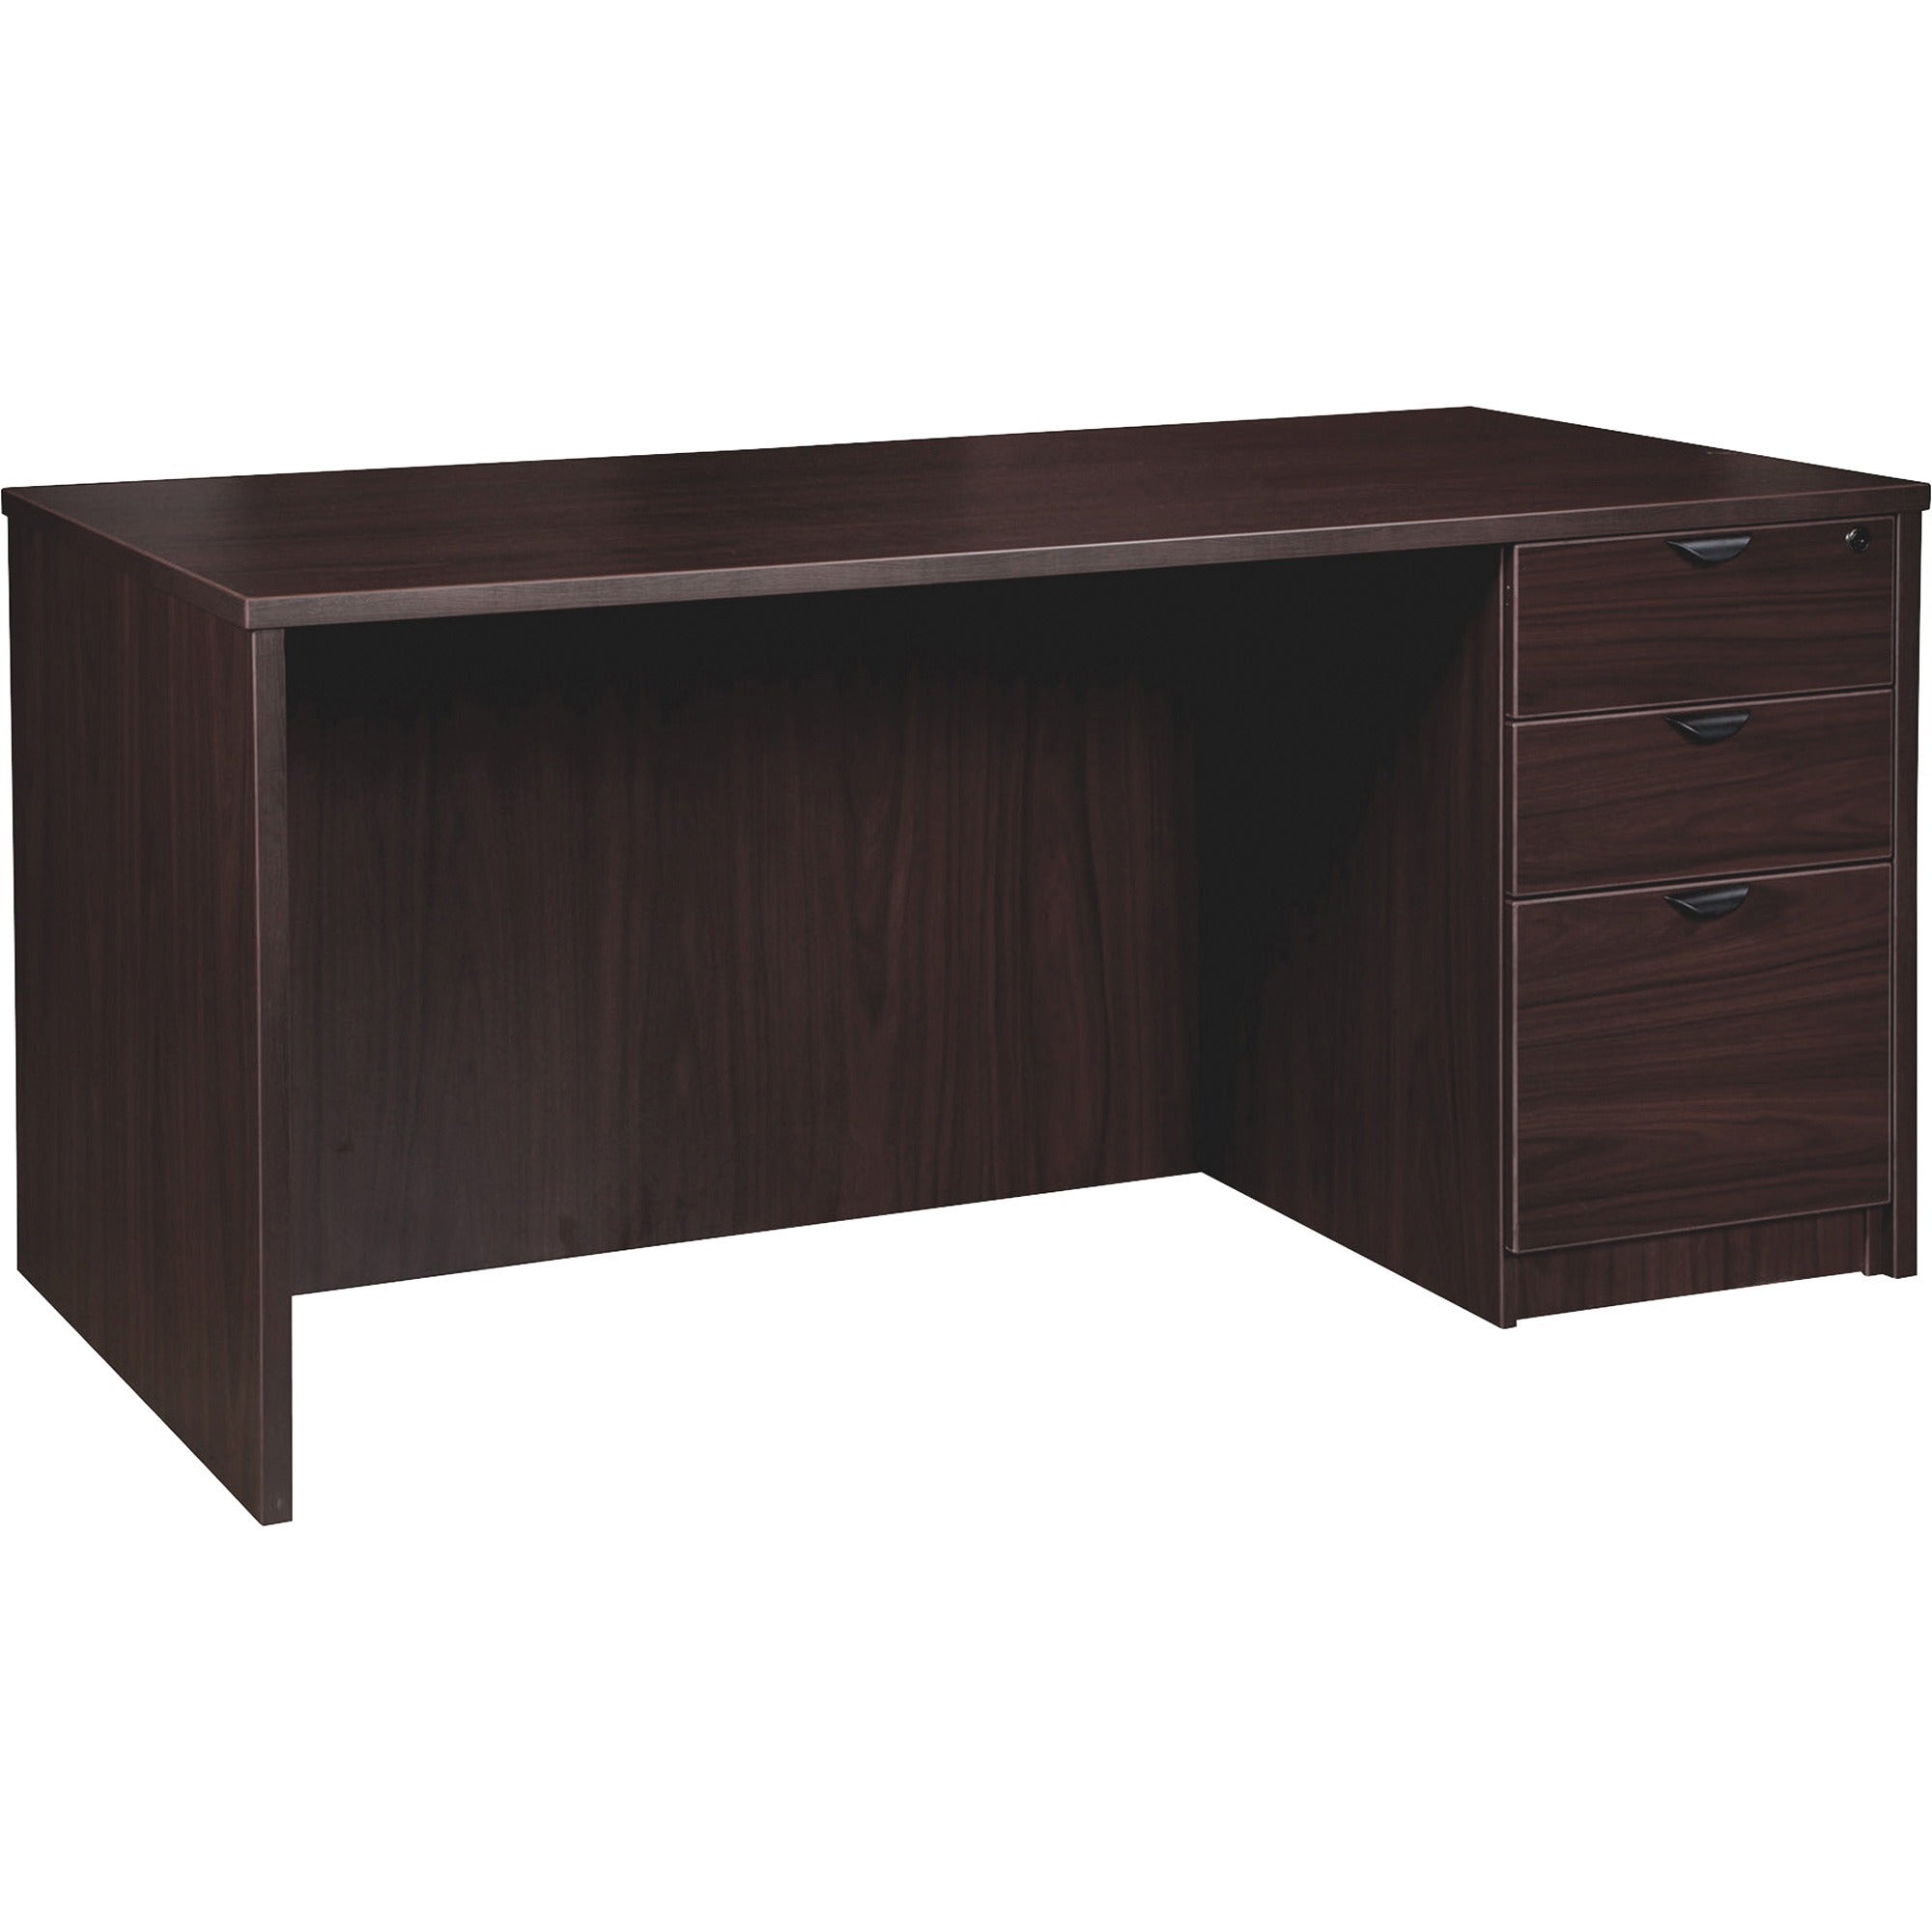 Lorell Prominence 2.0 Right-Pedestal Desk - 1" Top, 66" x 30"29" - 3 x File, Box Drawer(s) - Single Pedestal on Right Side - Band Edge - Material: Particleboard - Finish: Espresso Laminate, Thermofused Melamine (TFM) - 1